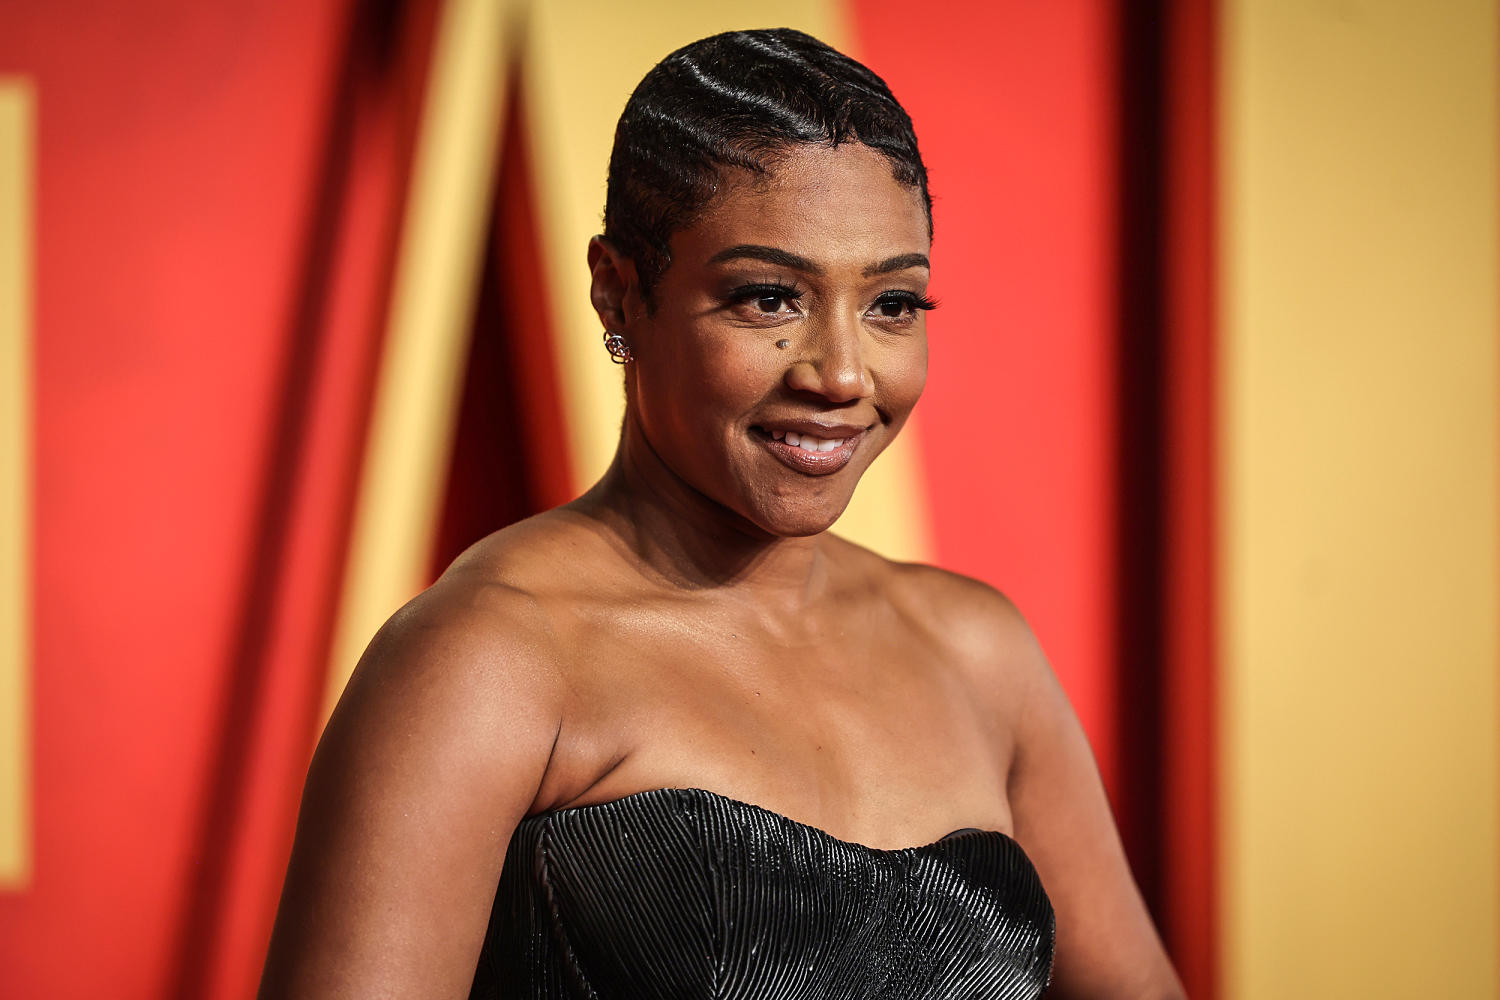 Tiffany Haddish started tracking down her online trolls and calling them on the phone